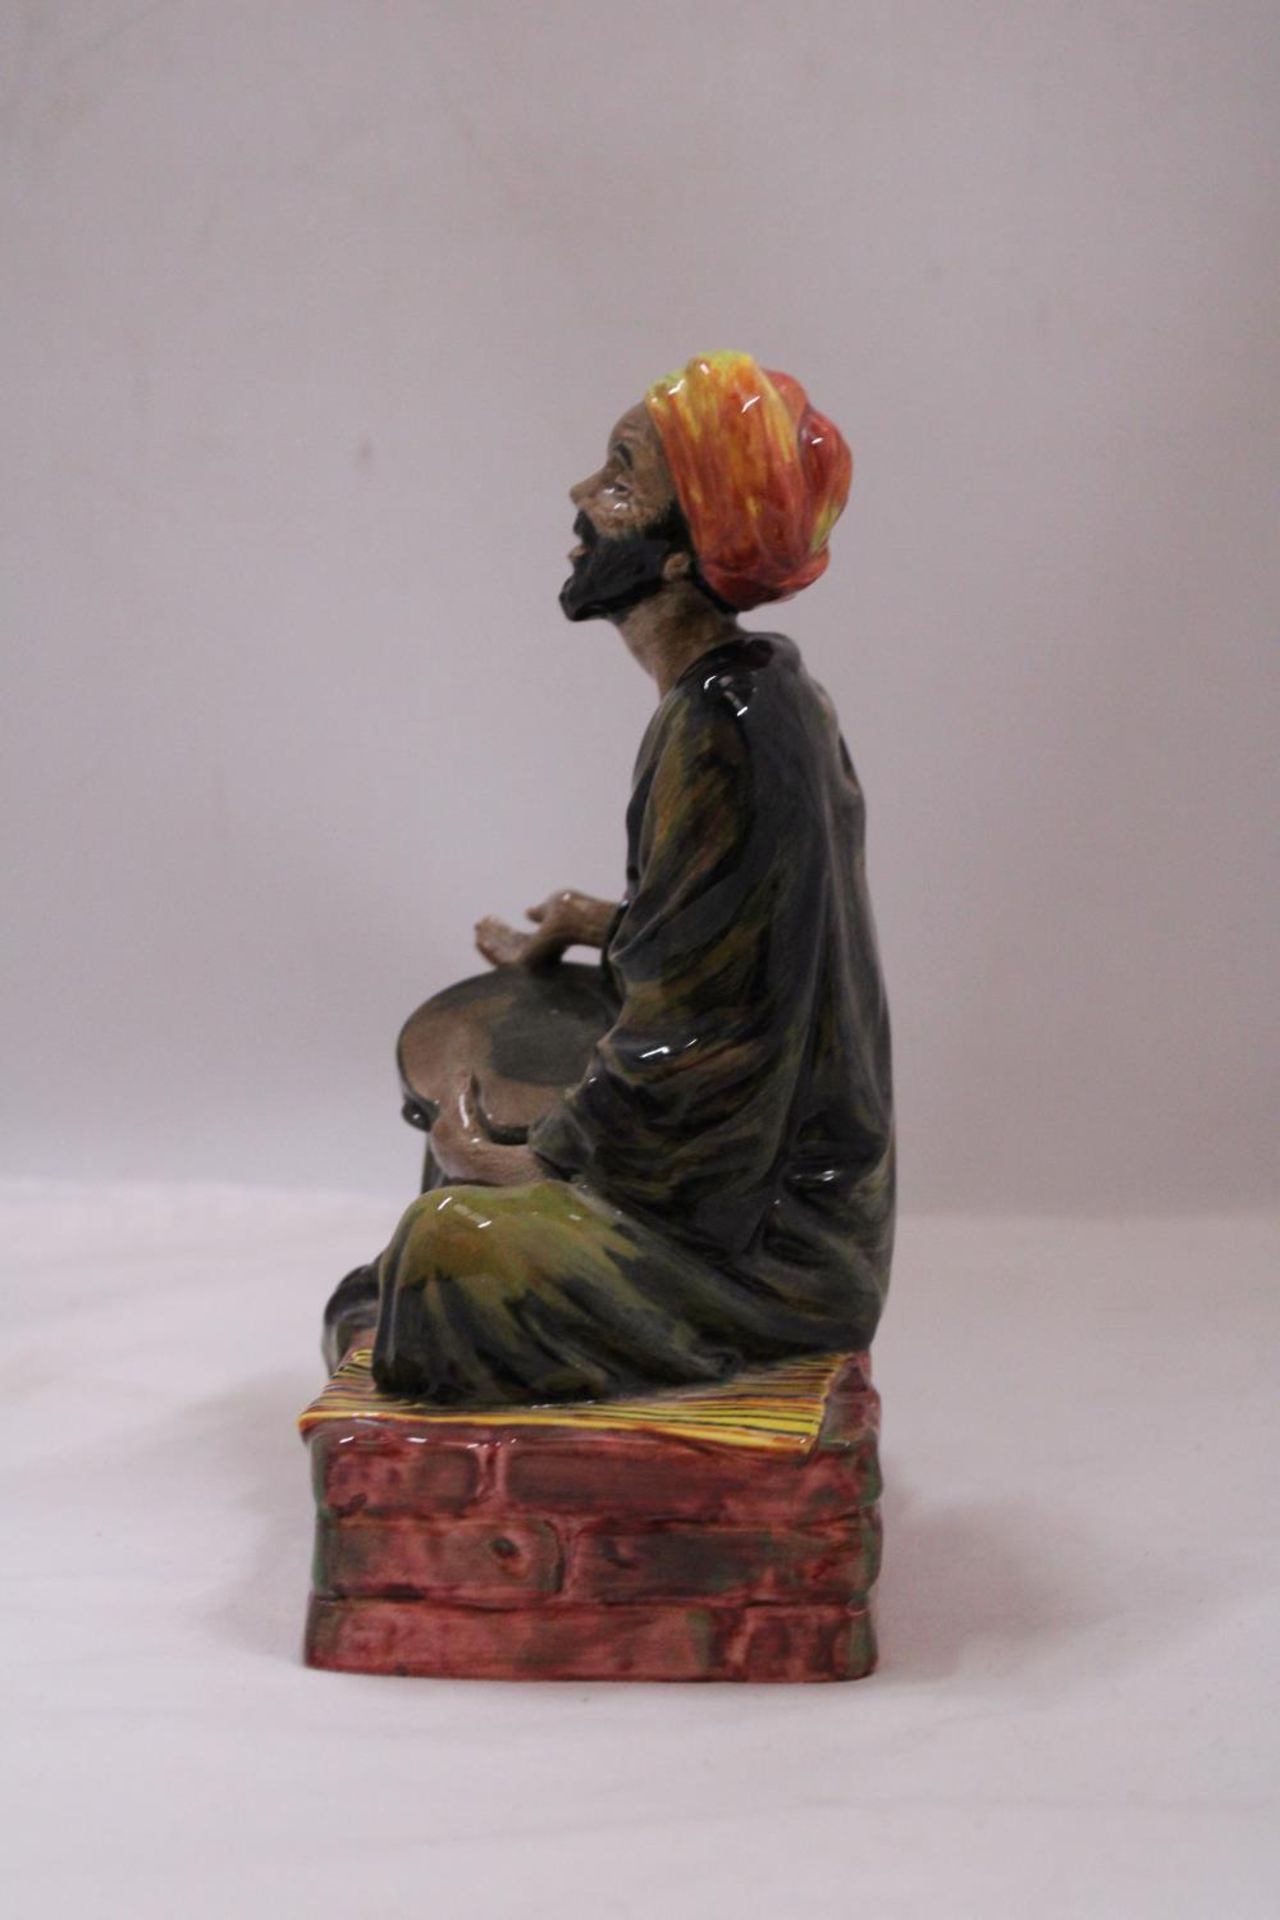 ROYAL DOULTON "MEDICANT" FIGURINE HN1365S - Image 2 of 4